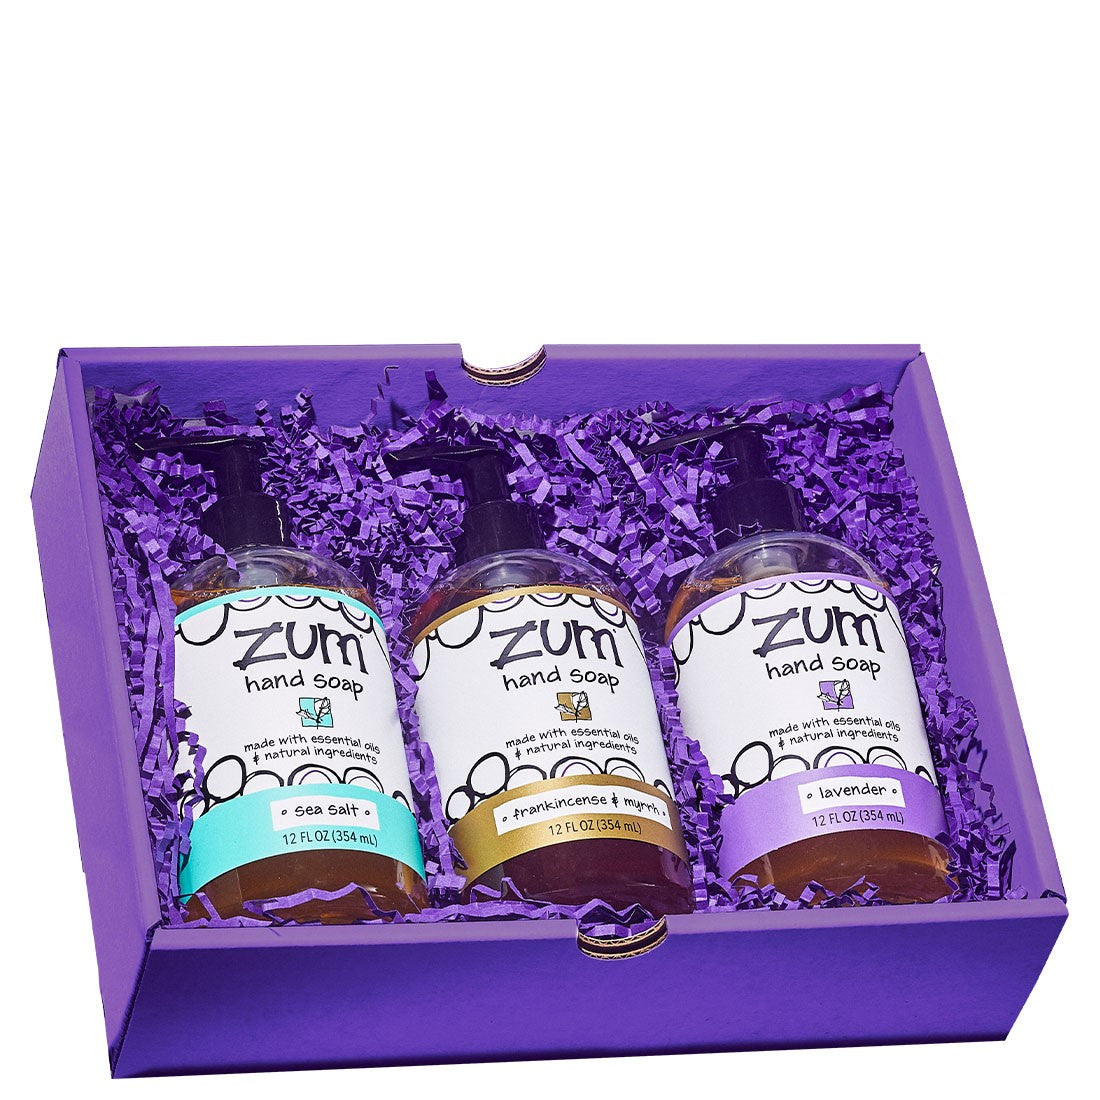 Rectangular gift box containing 3 hand soaps  with purple crinkle packing material.